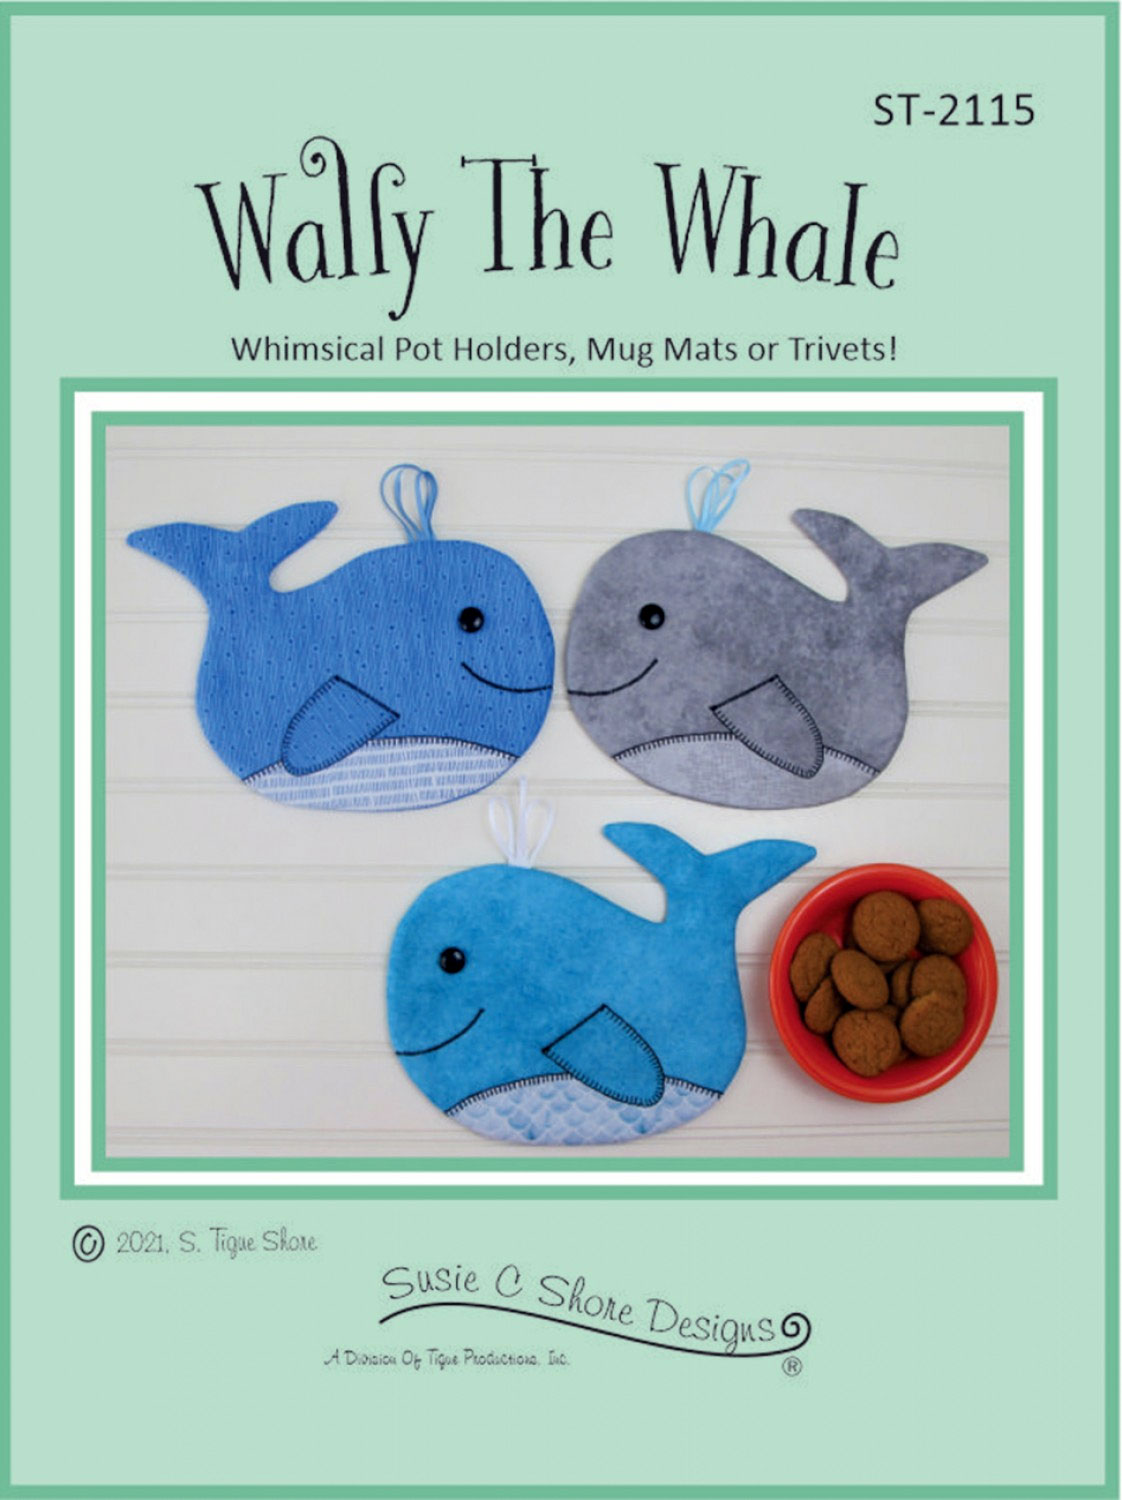 Wally-The-Whale-sewing-pattern-Susie-C-Shore-front